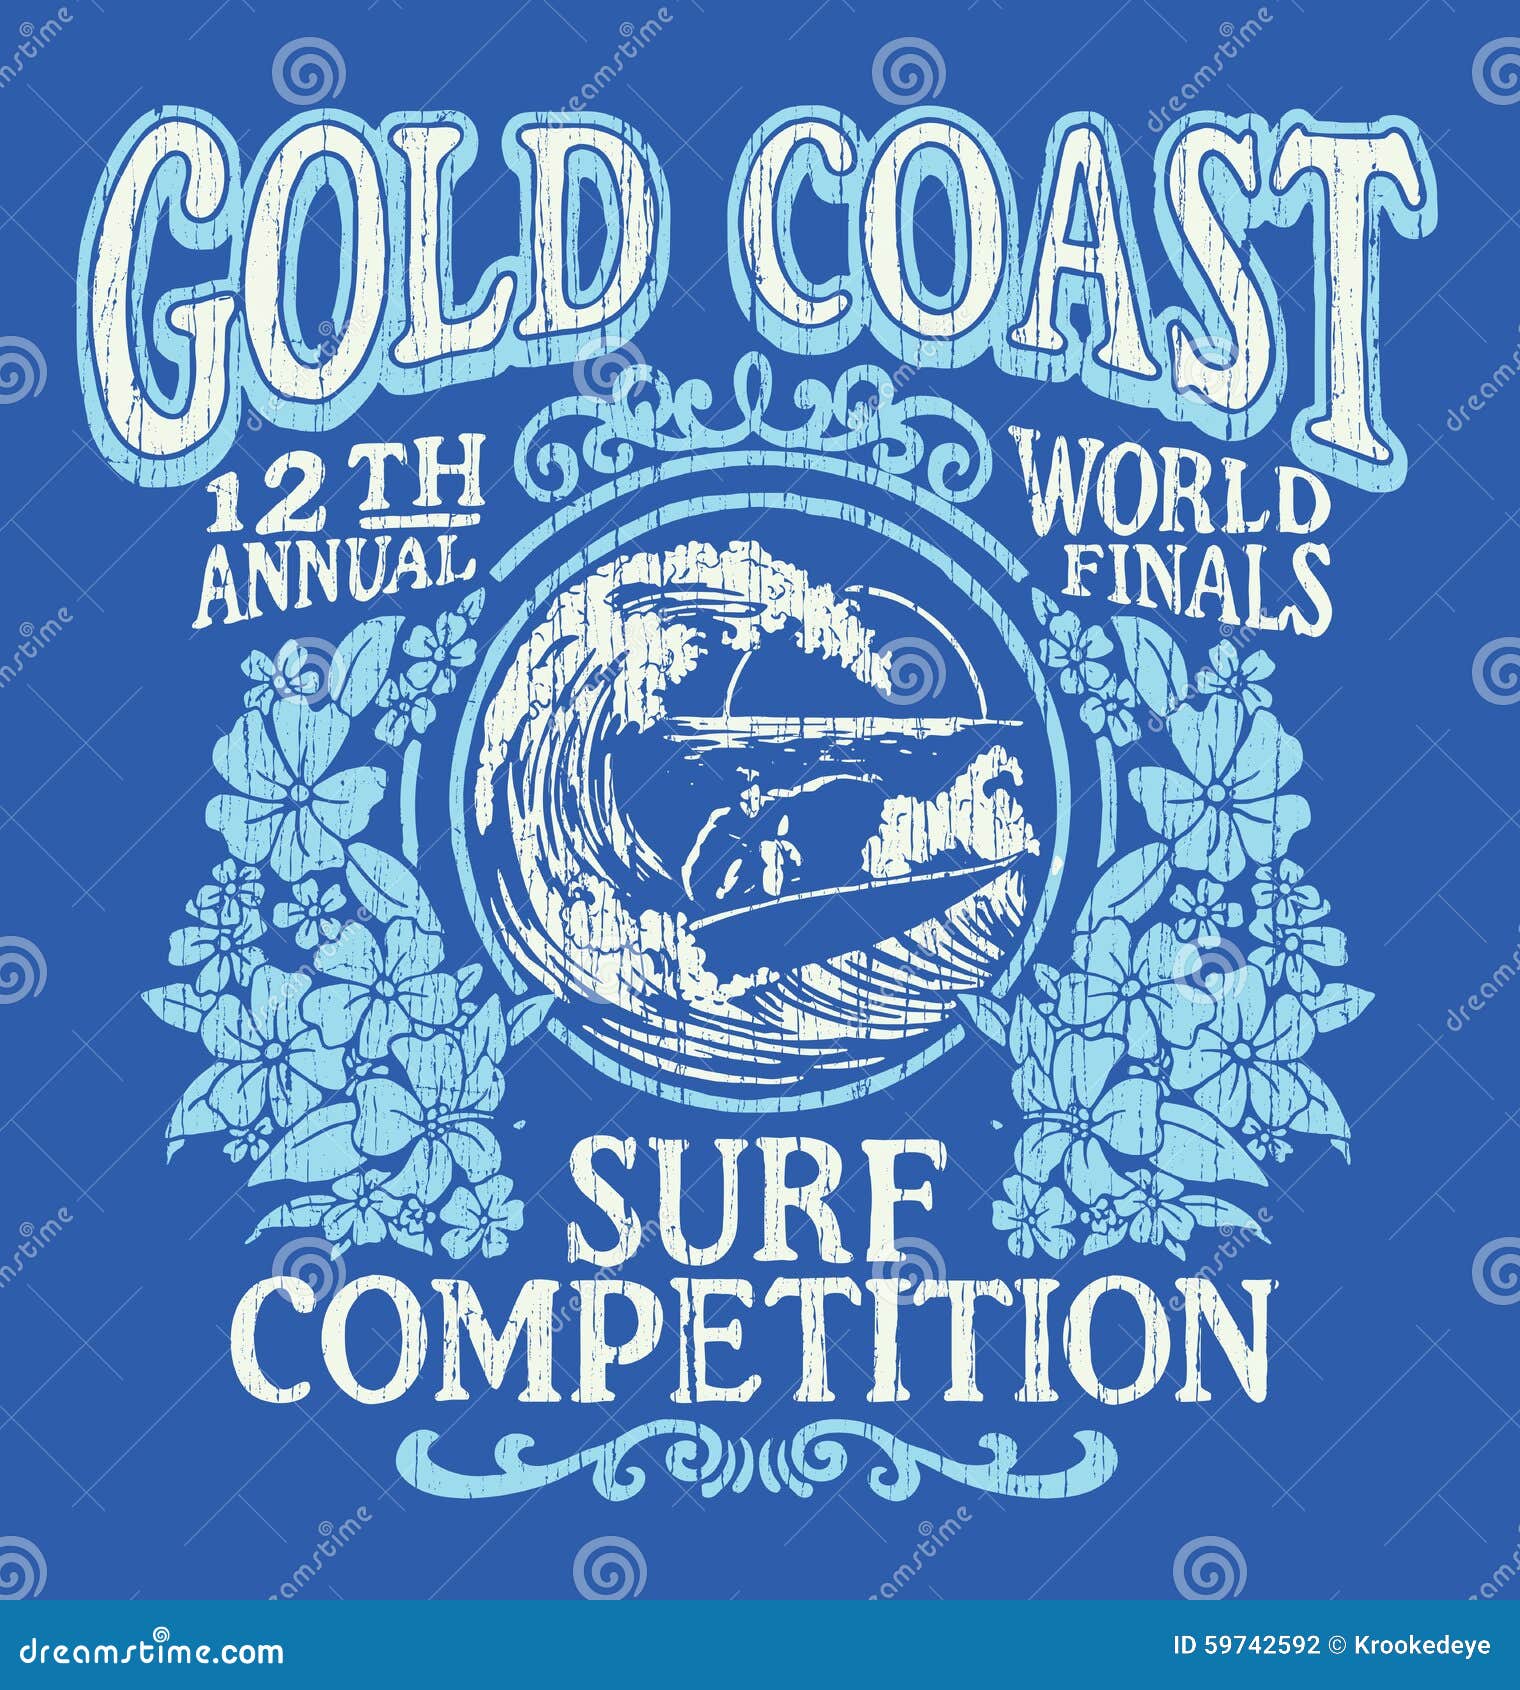 vintage surfing t-shirt graphic . gold coast surf competition.